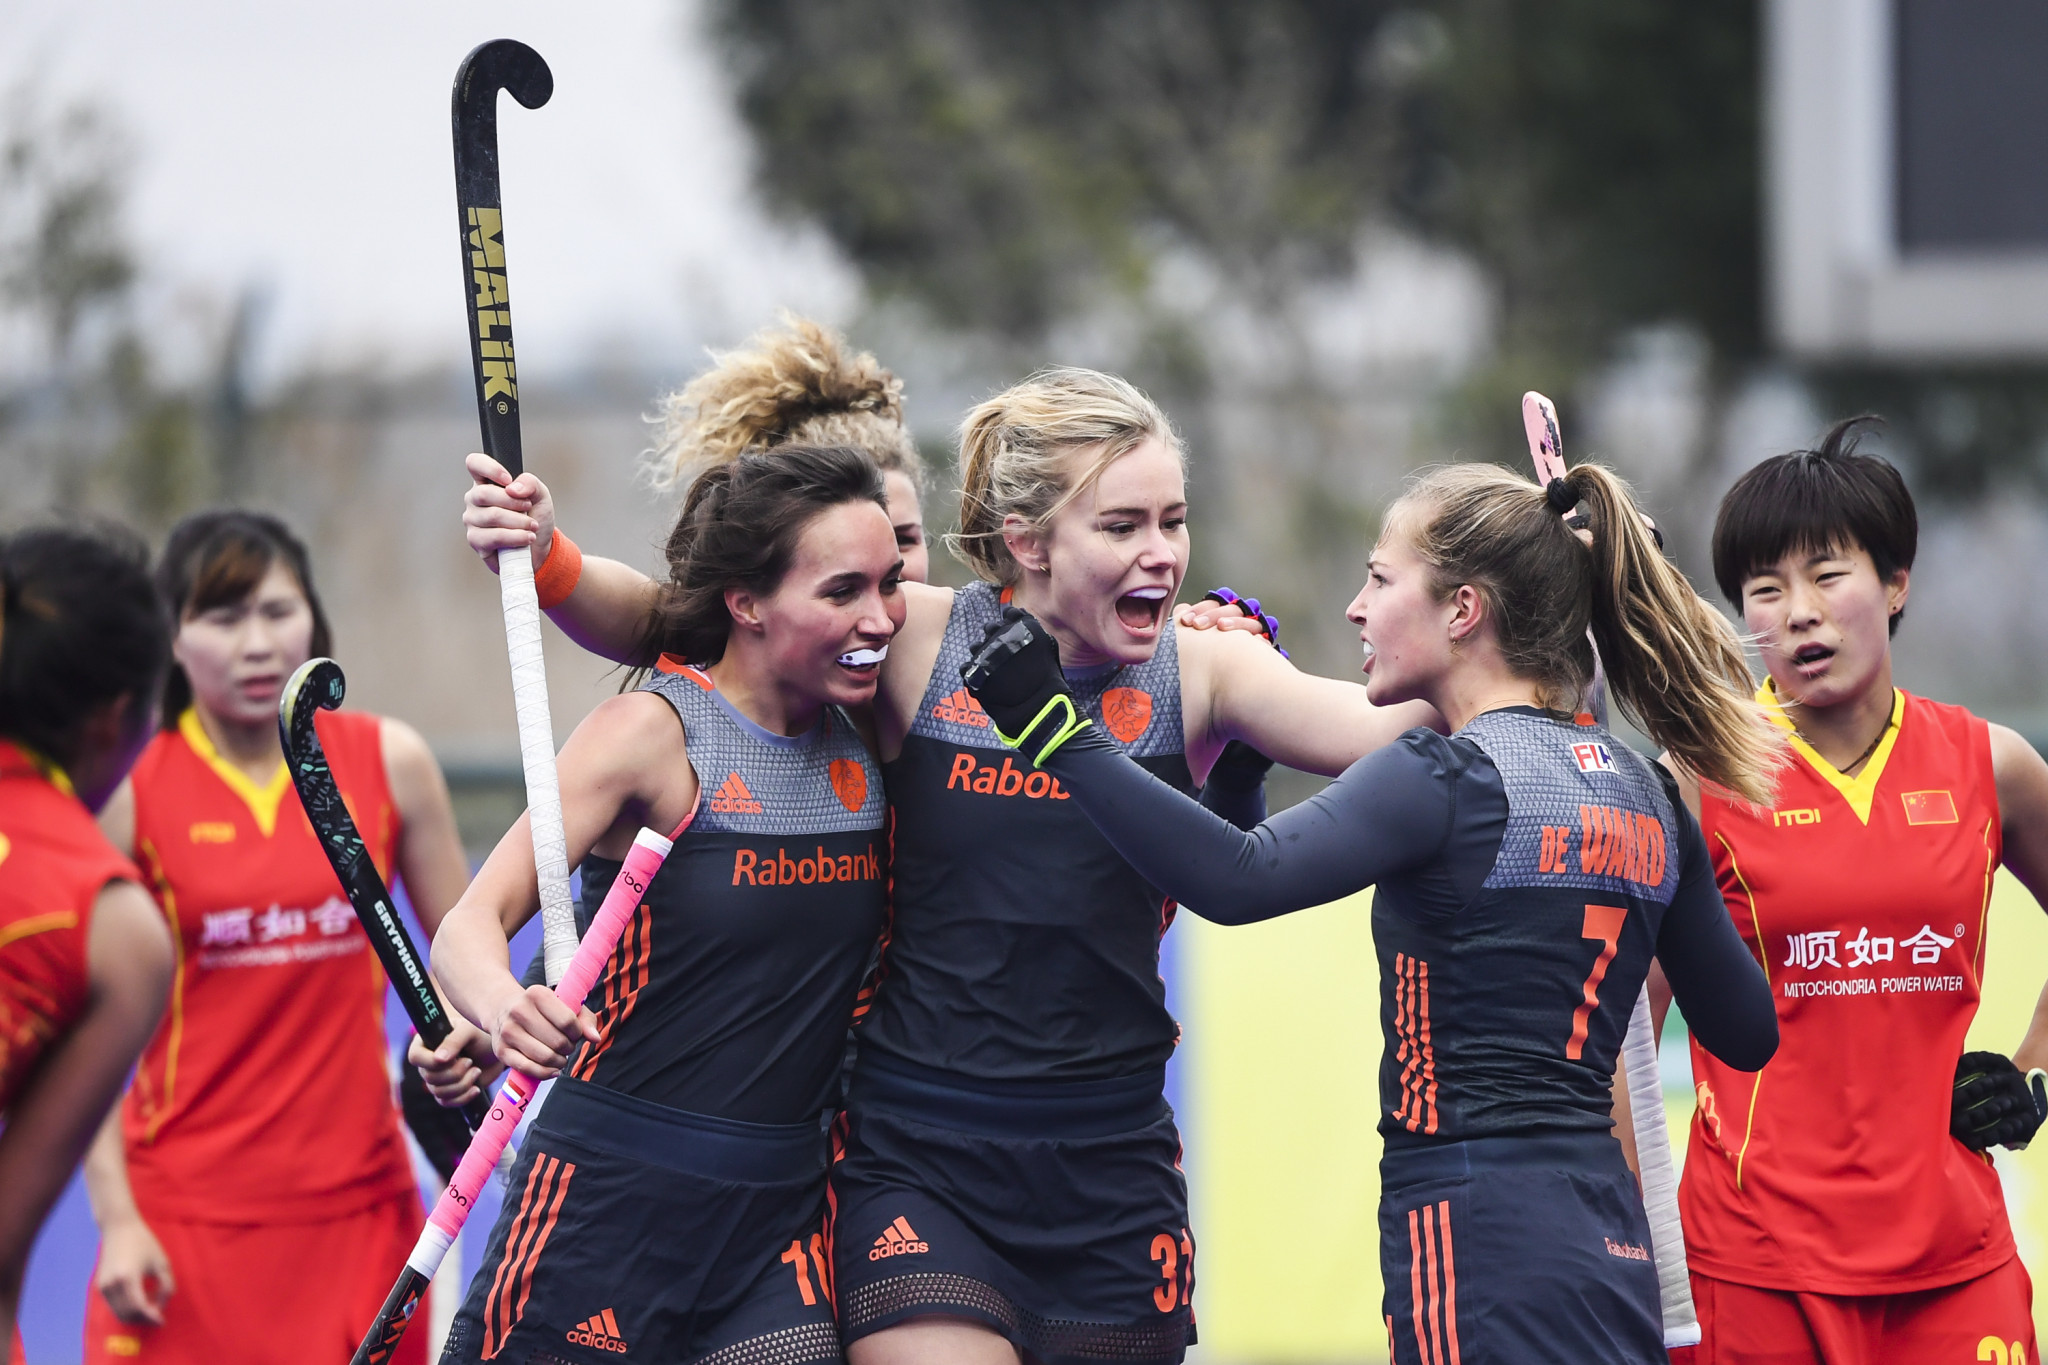 A late strike from Freeke Moes propelled The Netherlands back to the top of the women's standings ©Getty Images